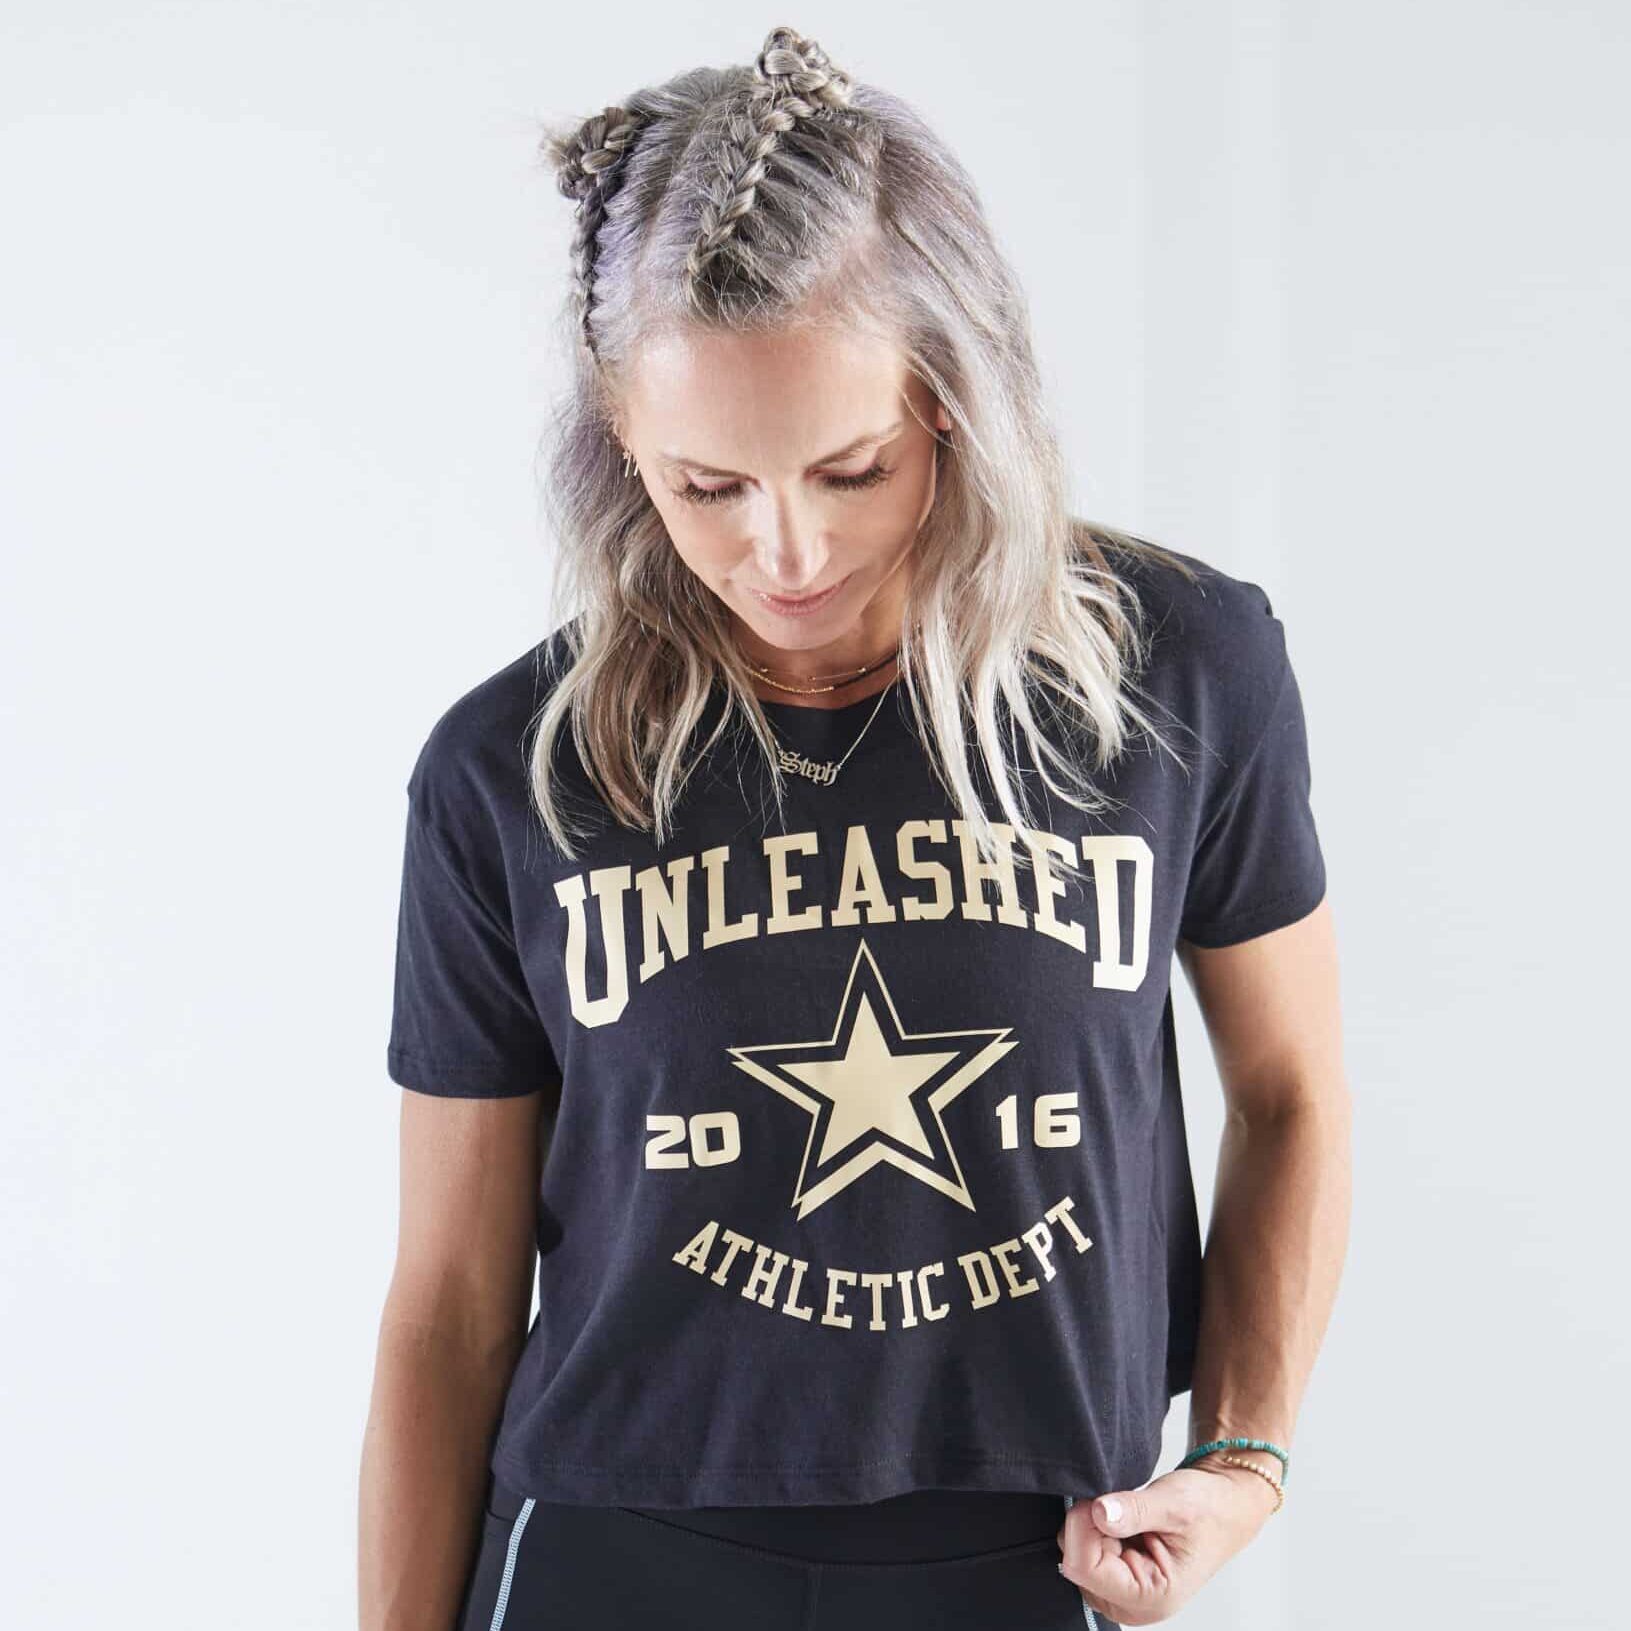 An Unleashed Health and Fitness branded cropped tee.